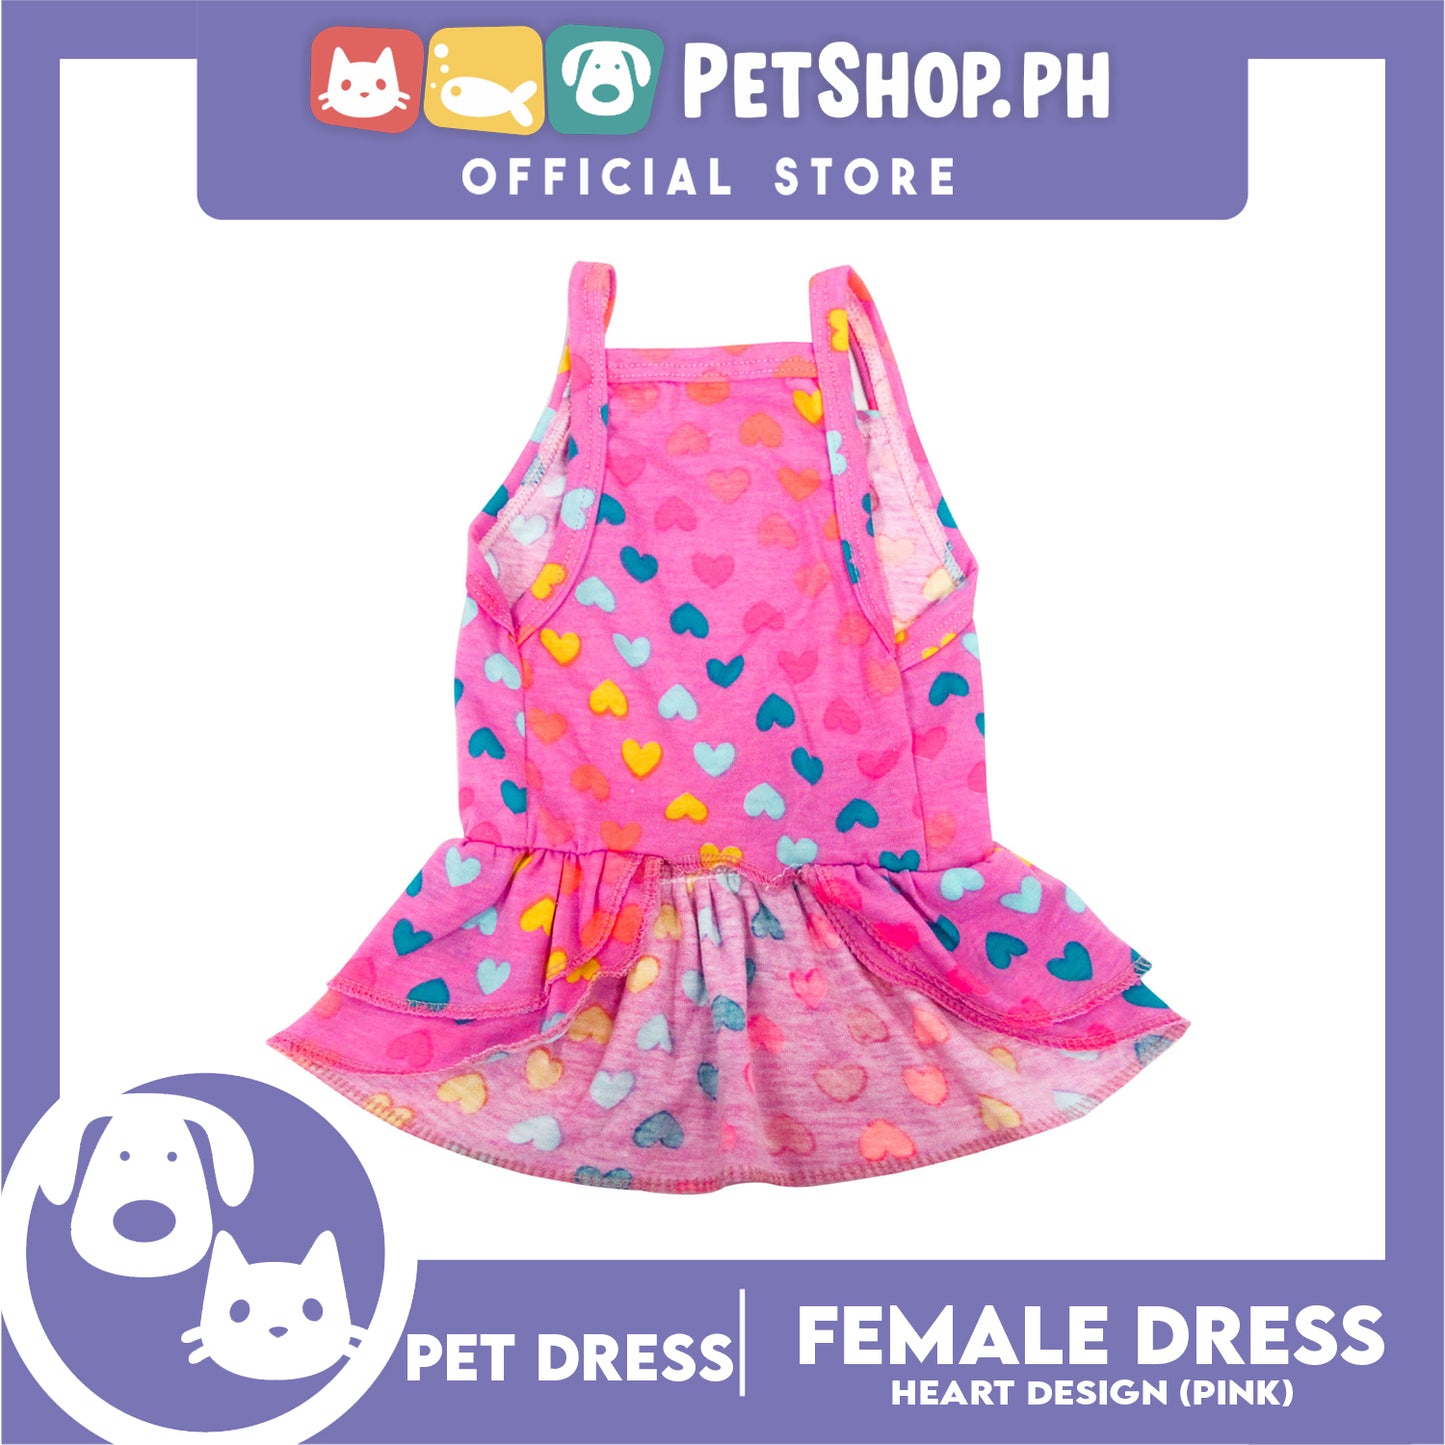 Pet Shirt Purple Dress Sando Shirt with Heart Design (Medium) Perfect Fit for Dogs and Cats Cloth